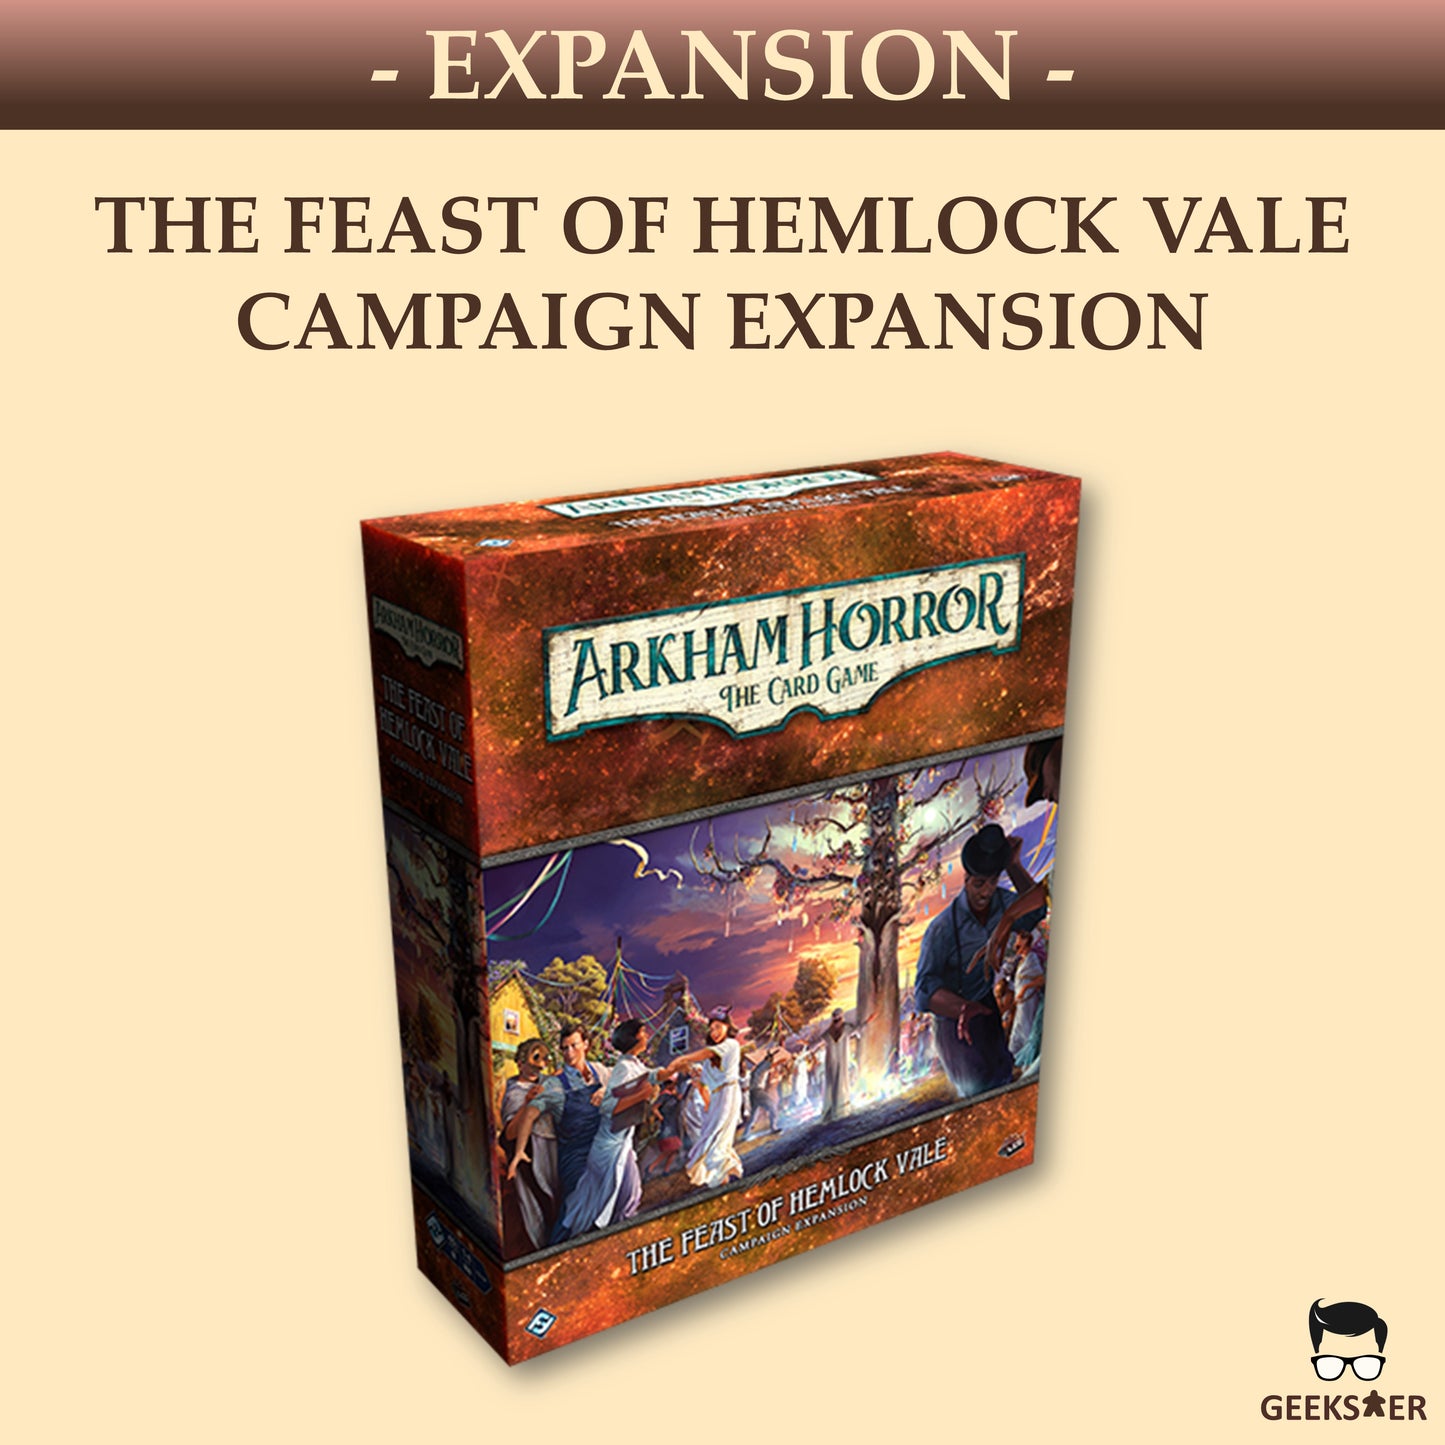 The Feast of Hemlock Vale Campaign Expansion